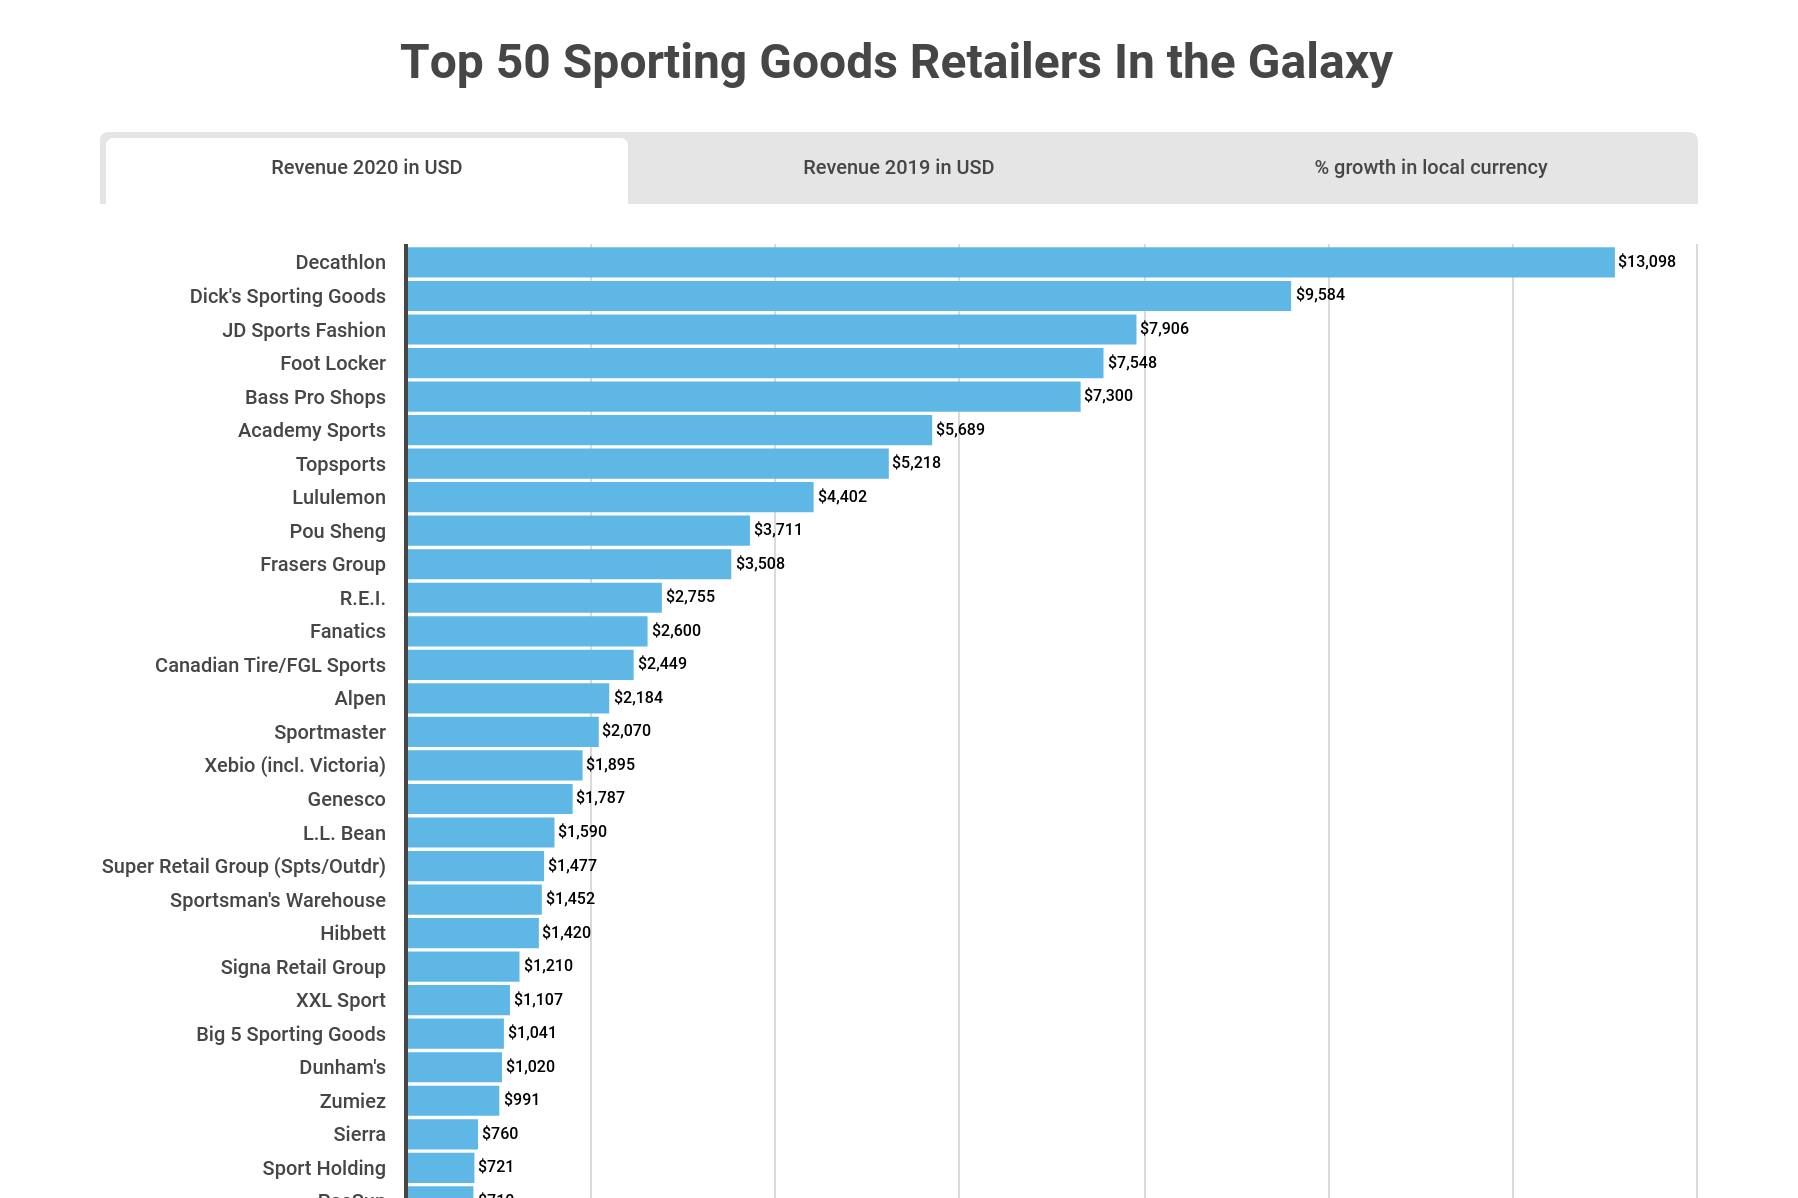 Top 50 Sporting Goods Retailers in the Galaxy